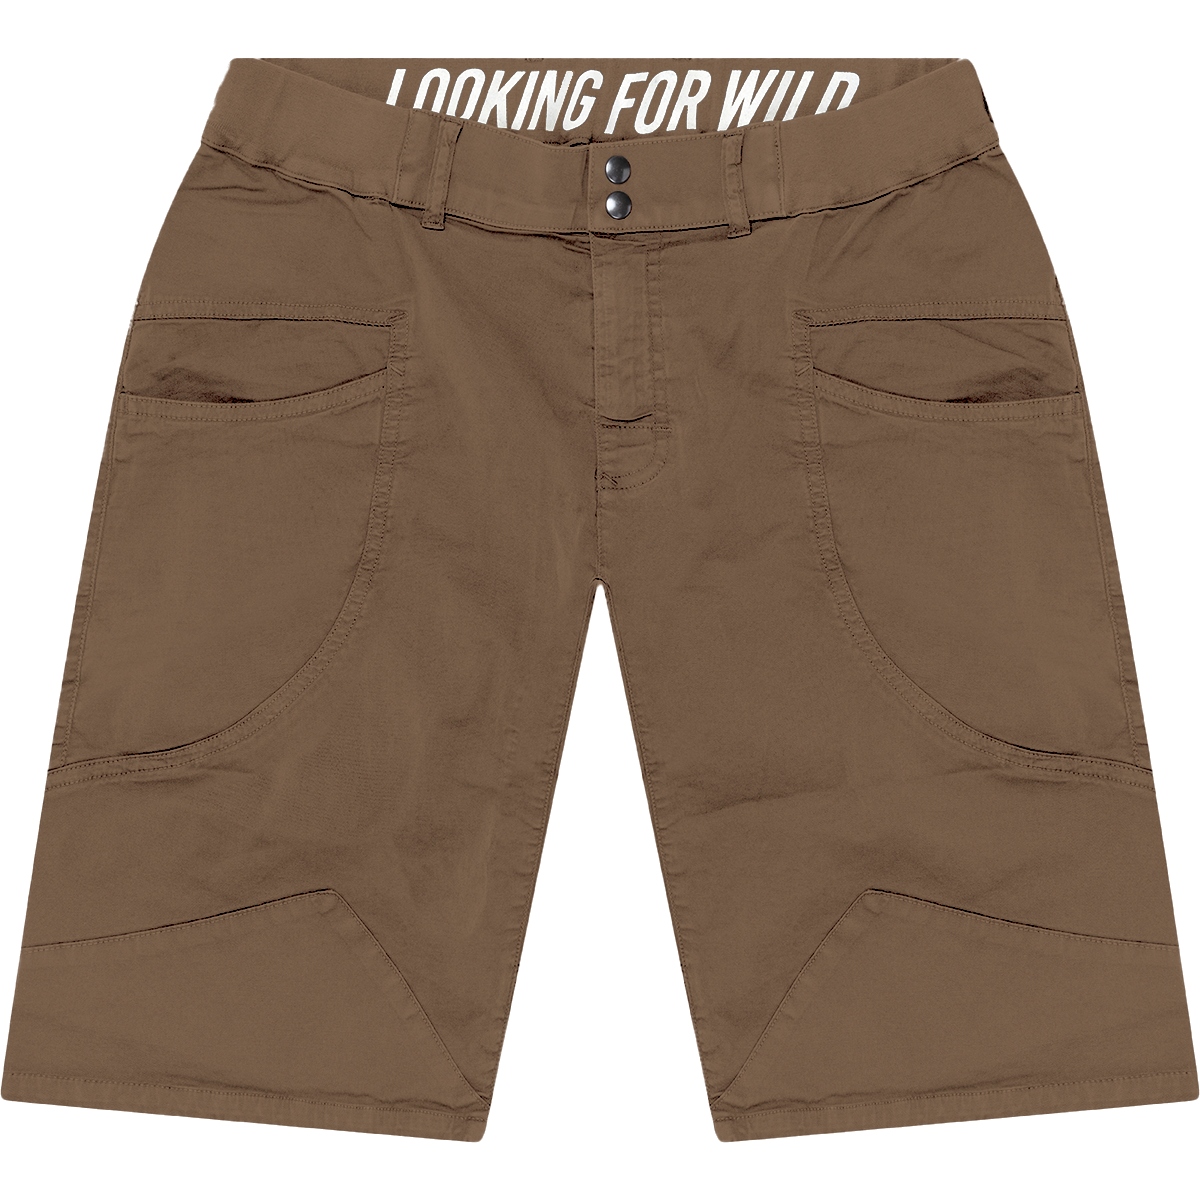 Picture of LOOKING FOR WILD Cilaos Shorts Men - Sepia Tint